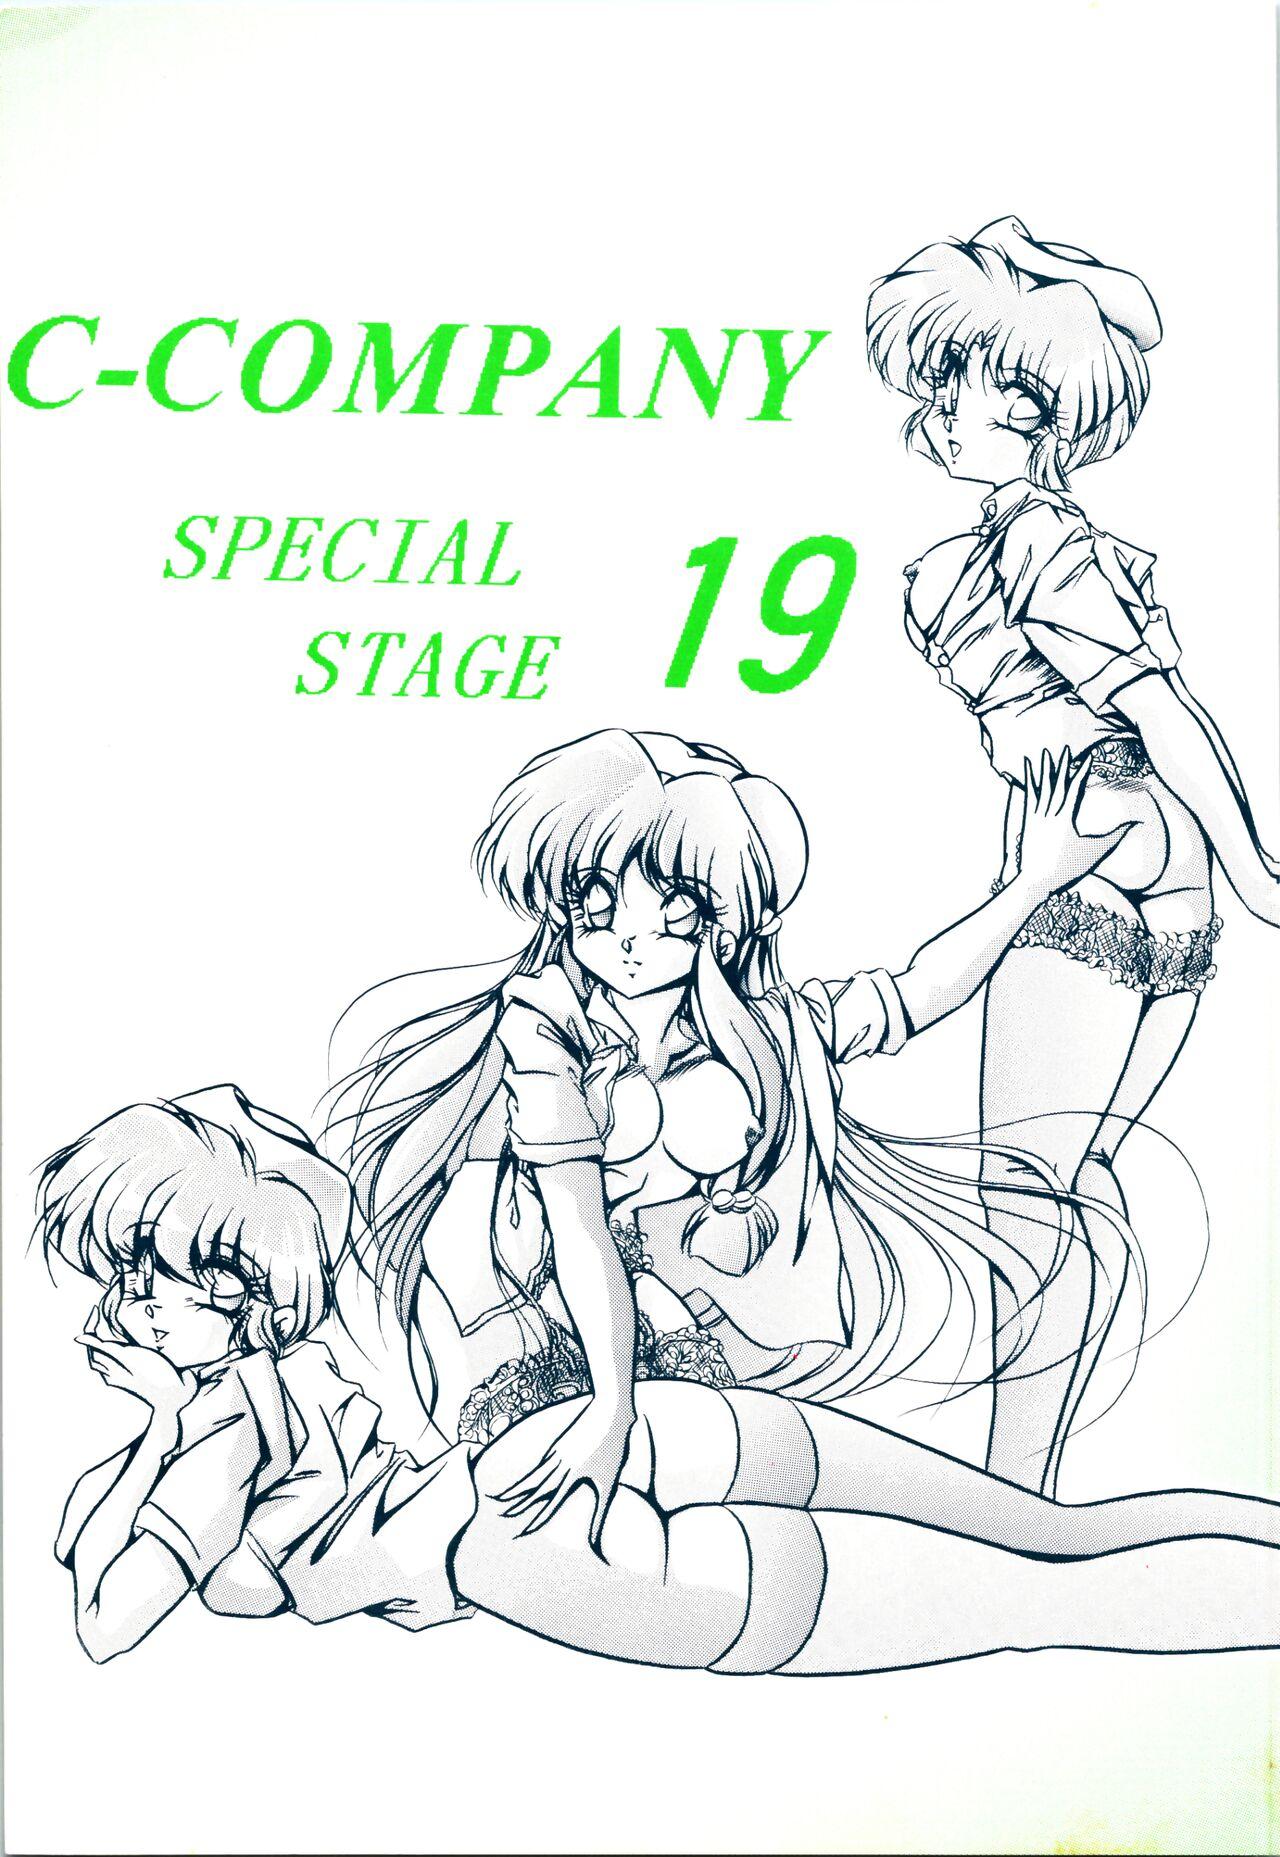 Creampie C-COMPANY SPECIAL STAGE 19 - Ranma 12 White Girl - Page 1